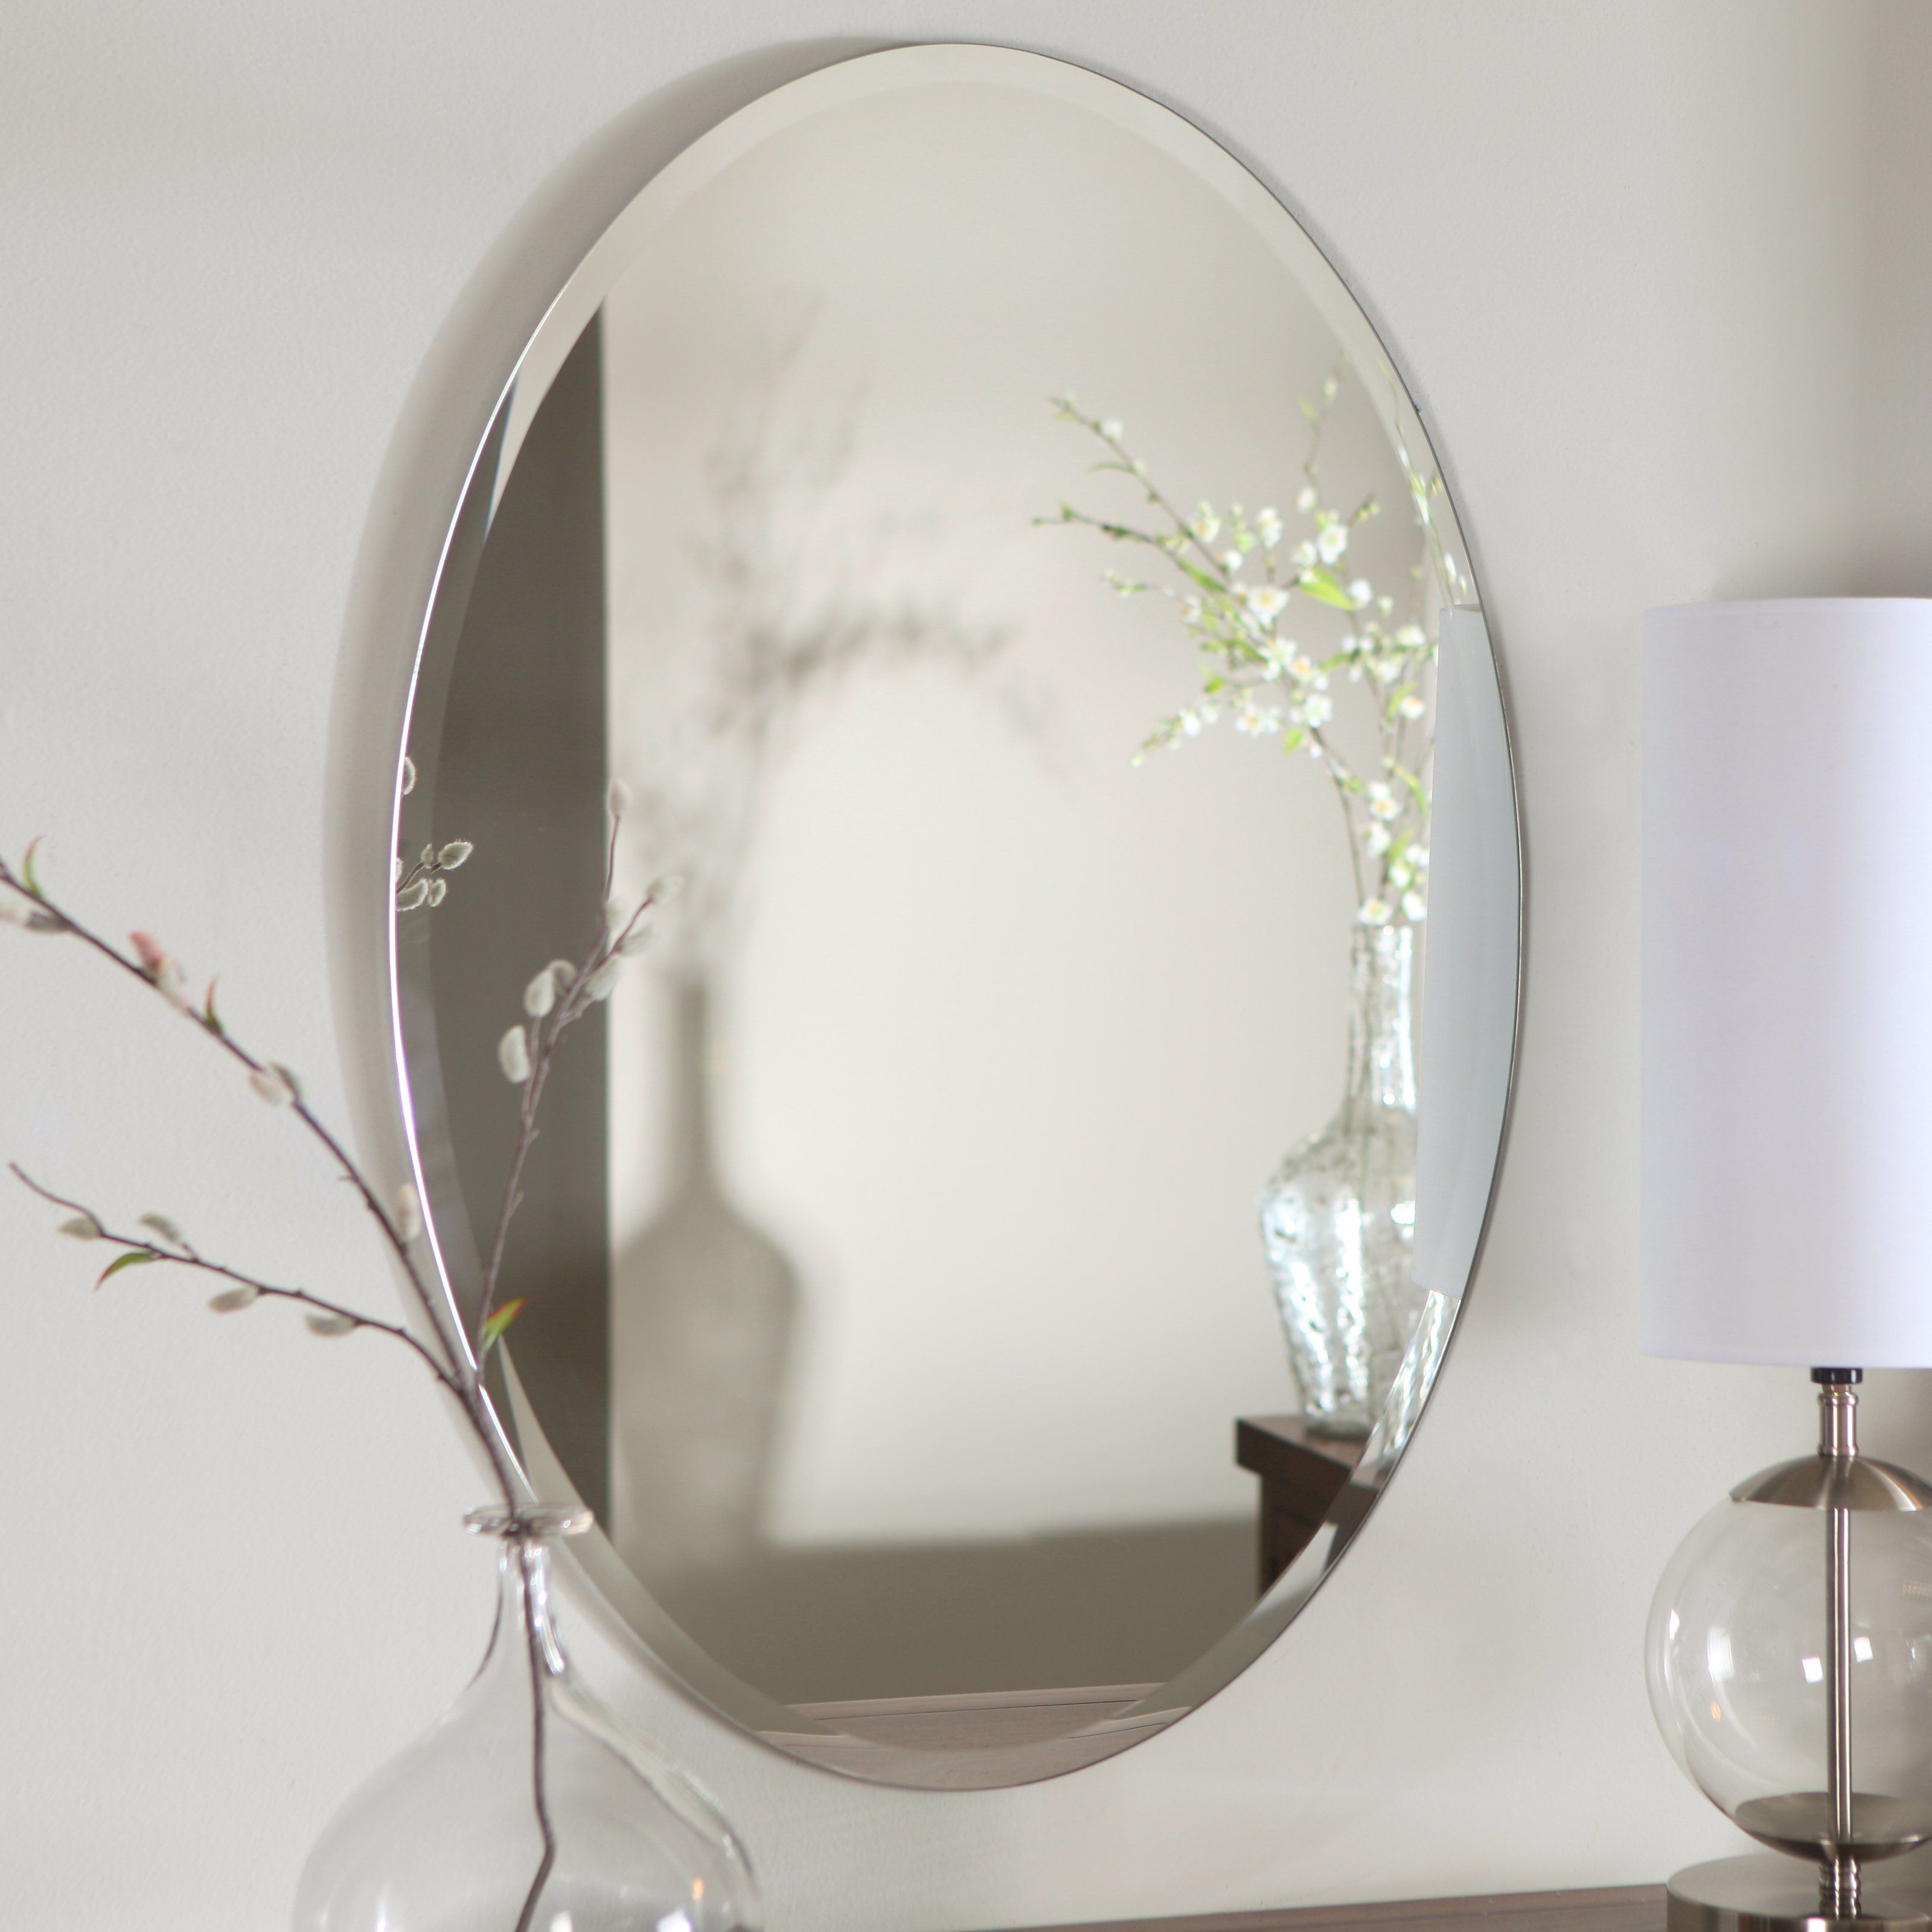 Most Recent Top 35 Marvelous Frameless Mirror Plain Floor Length Accent Mirrors Inside Oval Full Length Wall Mirrors (View 6 of 20)